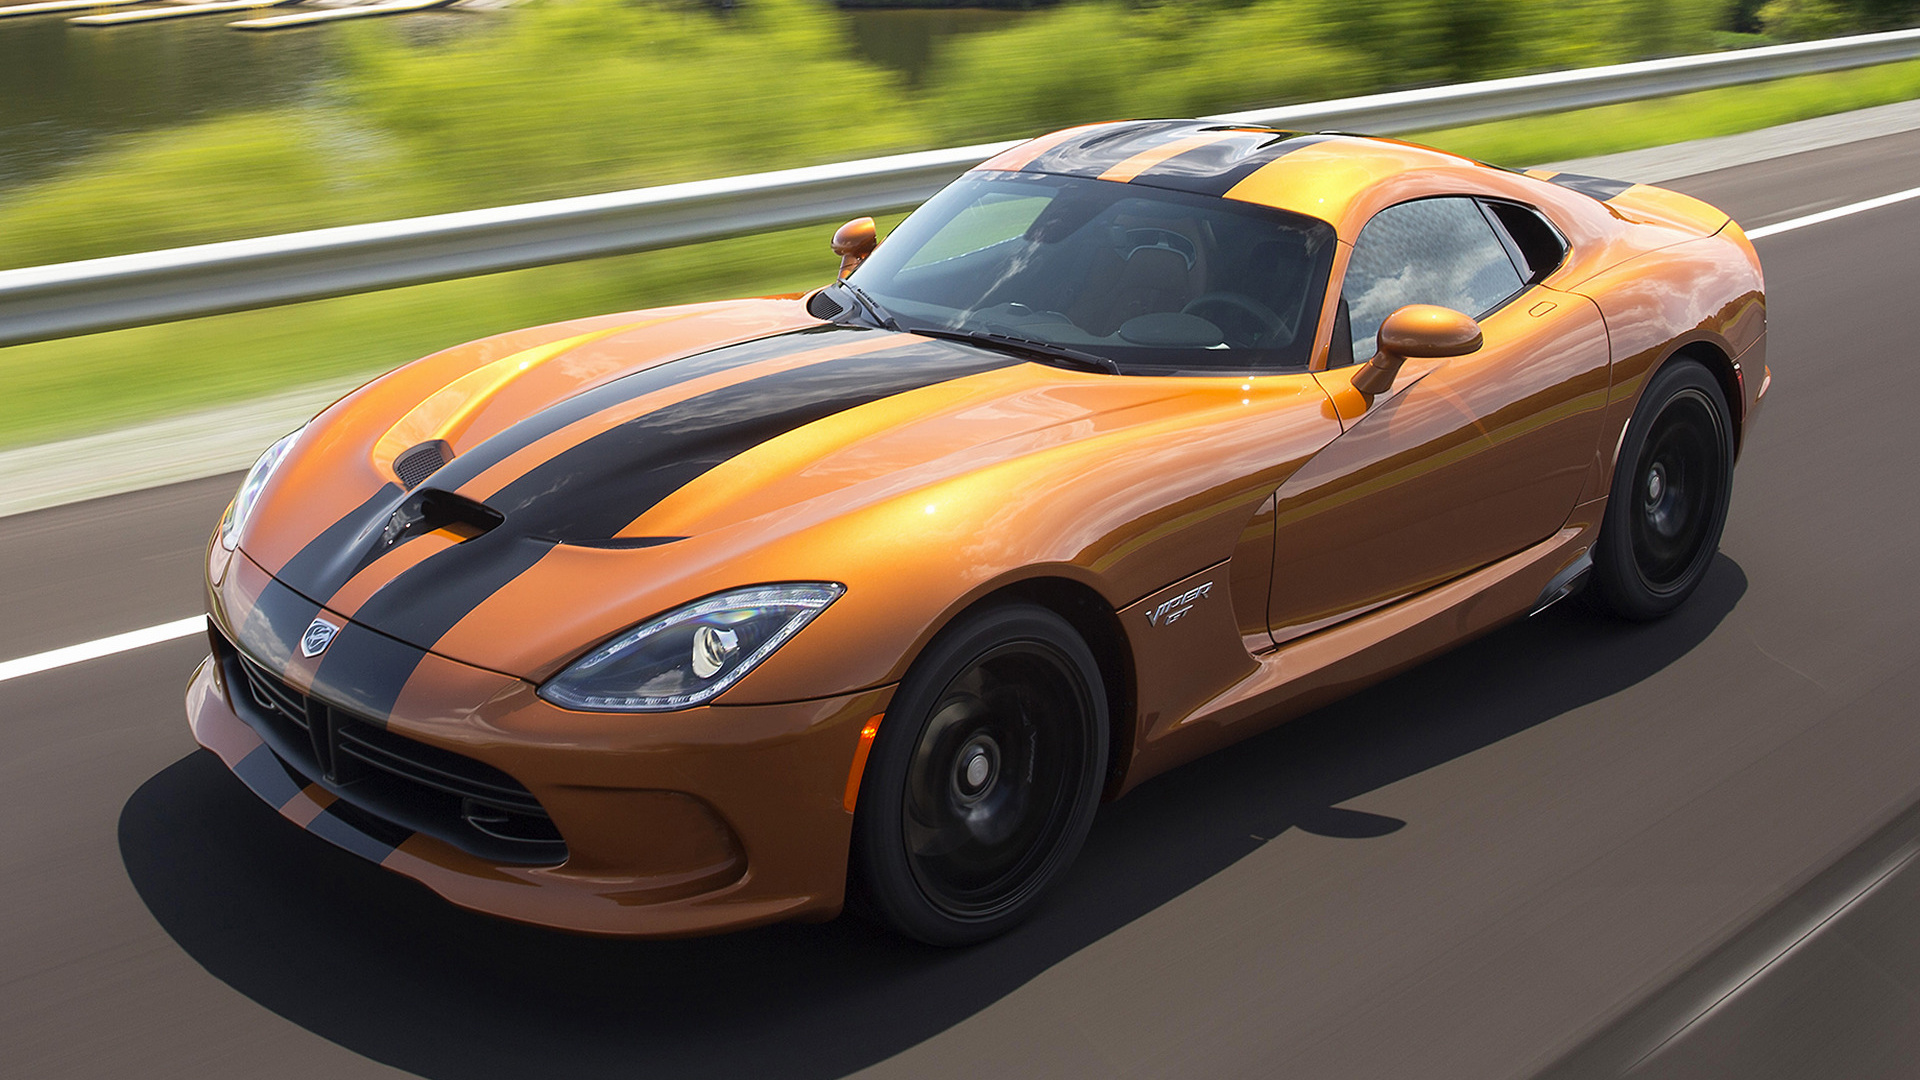 Dodge Viper Wallpaper High Resolution Car Pictures